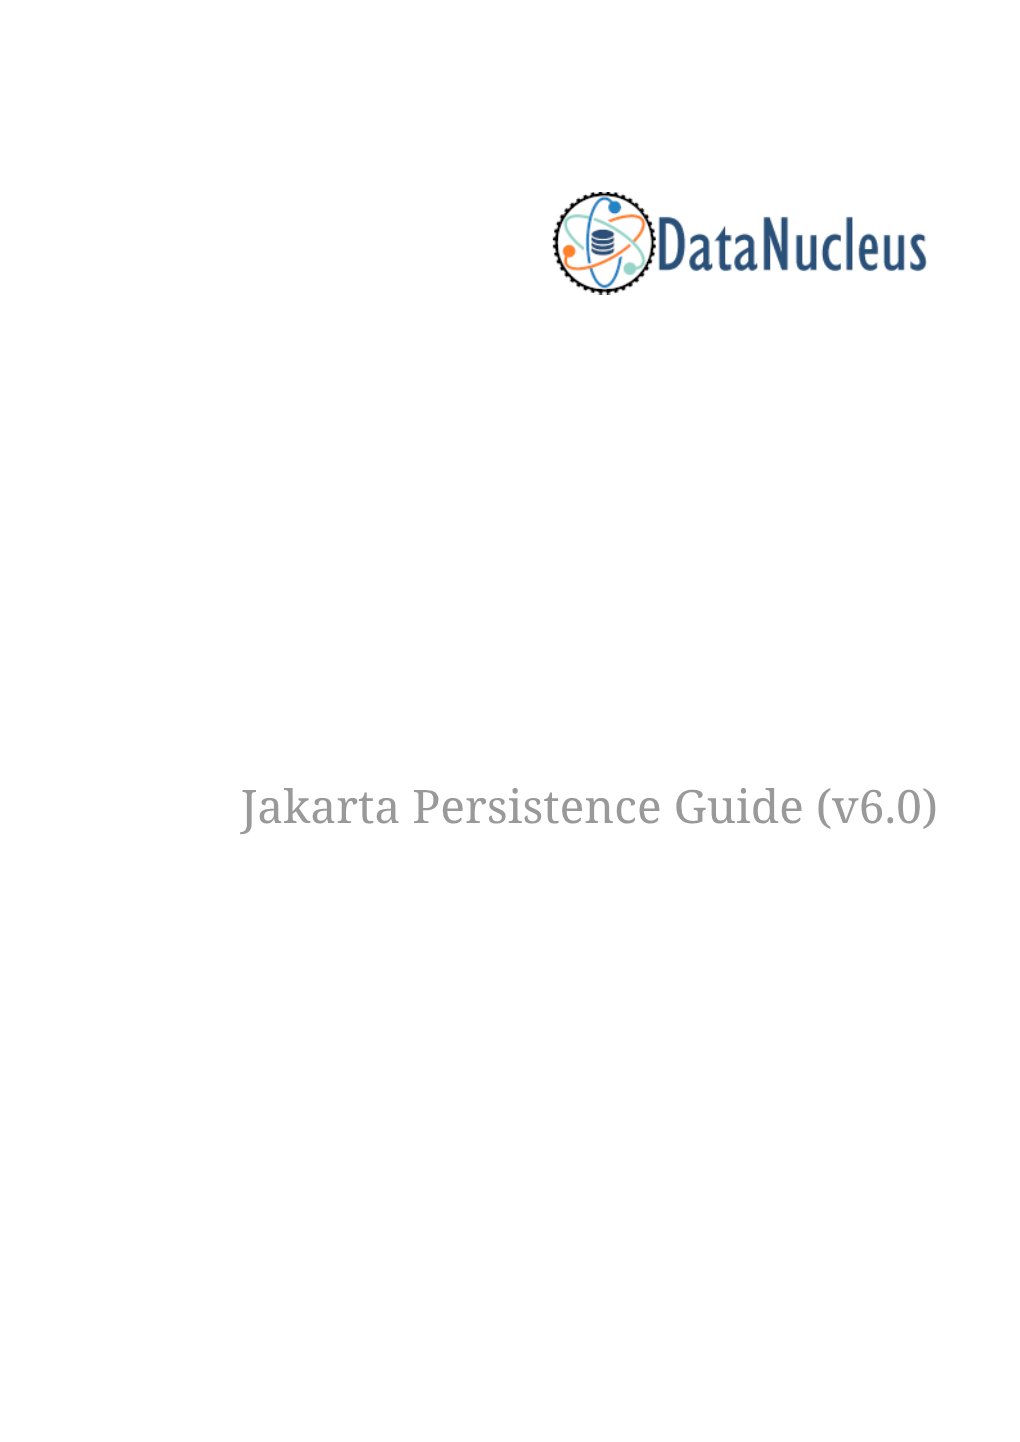 Jakarta Persistence Guide (V6.0) Table of Contents